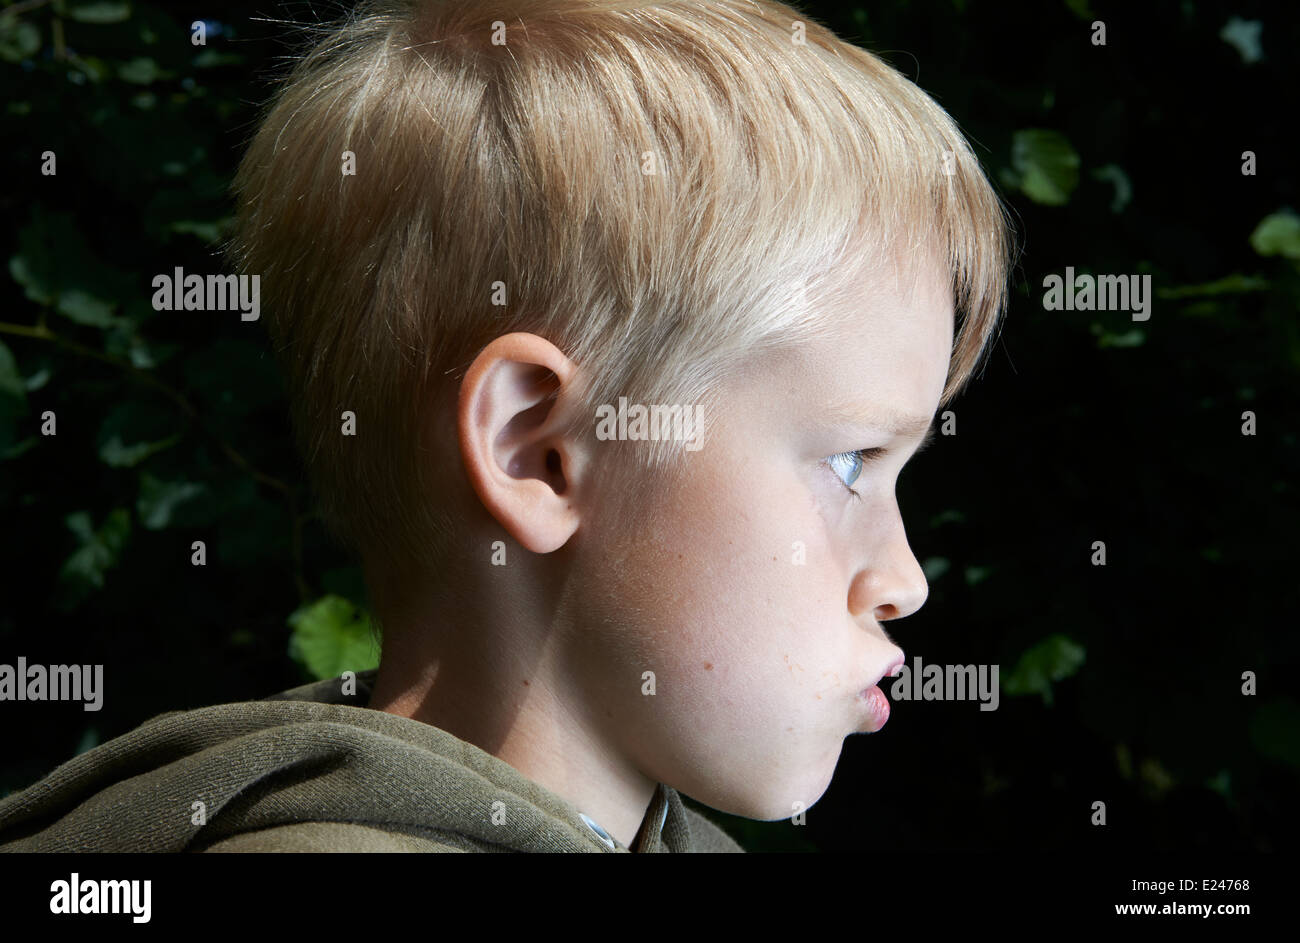 Headshot, side view Portrait Angry Child  isolated dark background. Negative Human face Expressions, Emotions, Conflict, Grimace Stock Photo